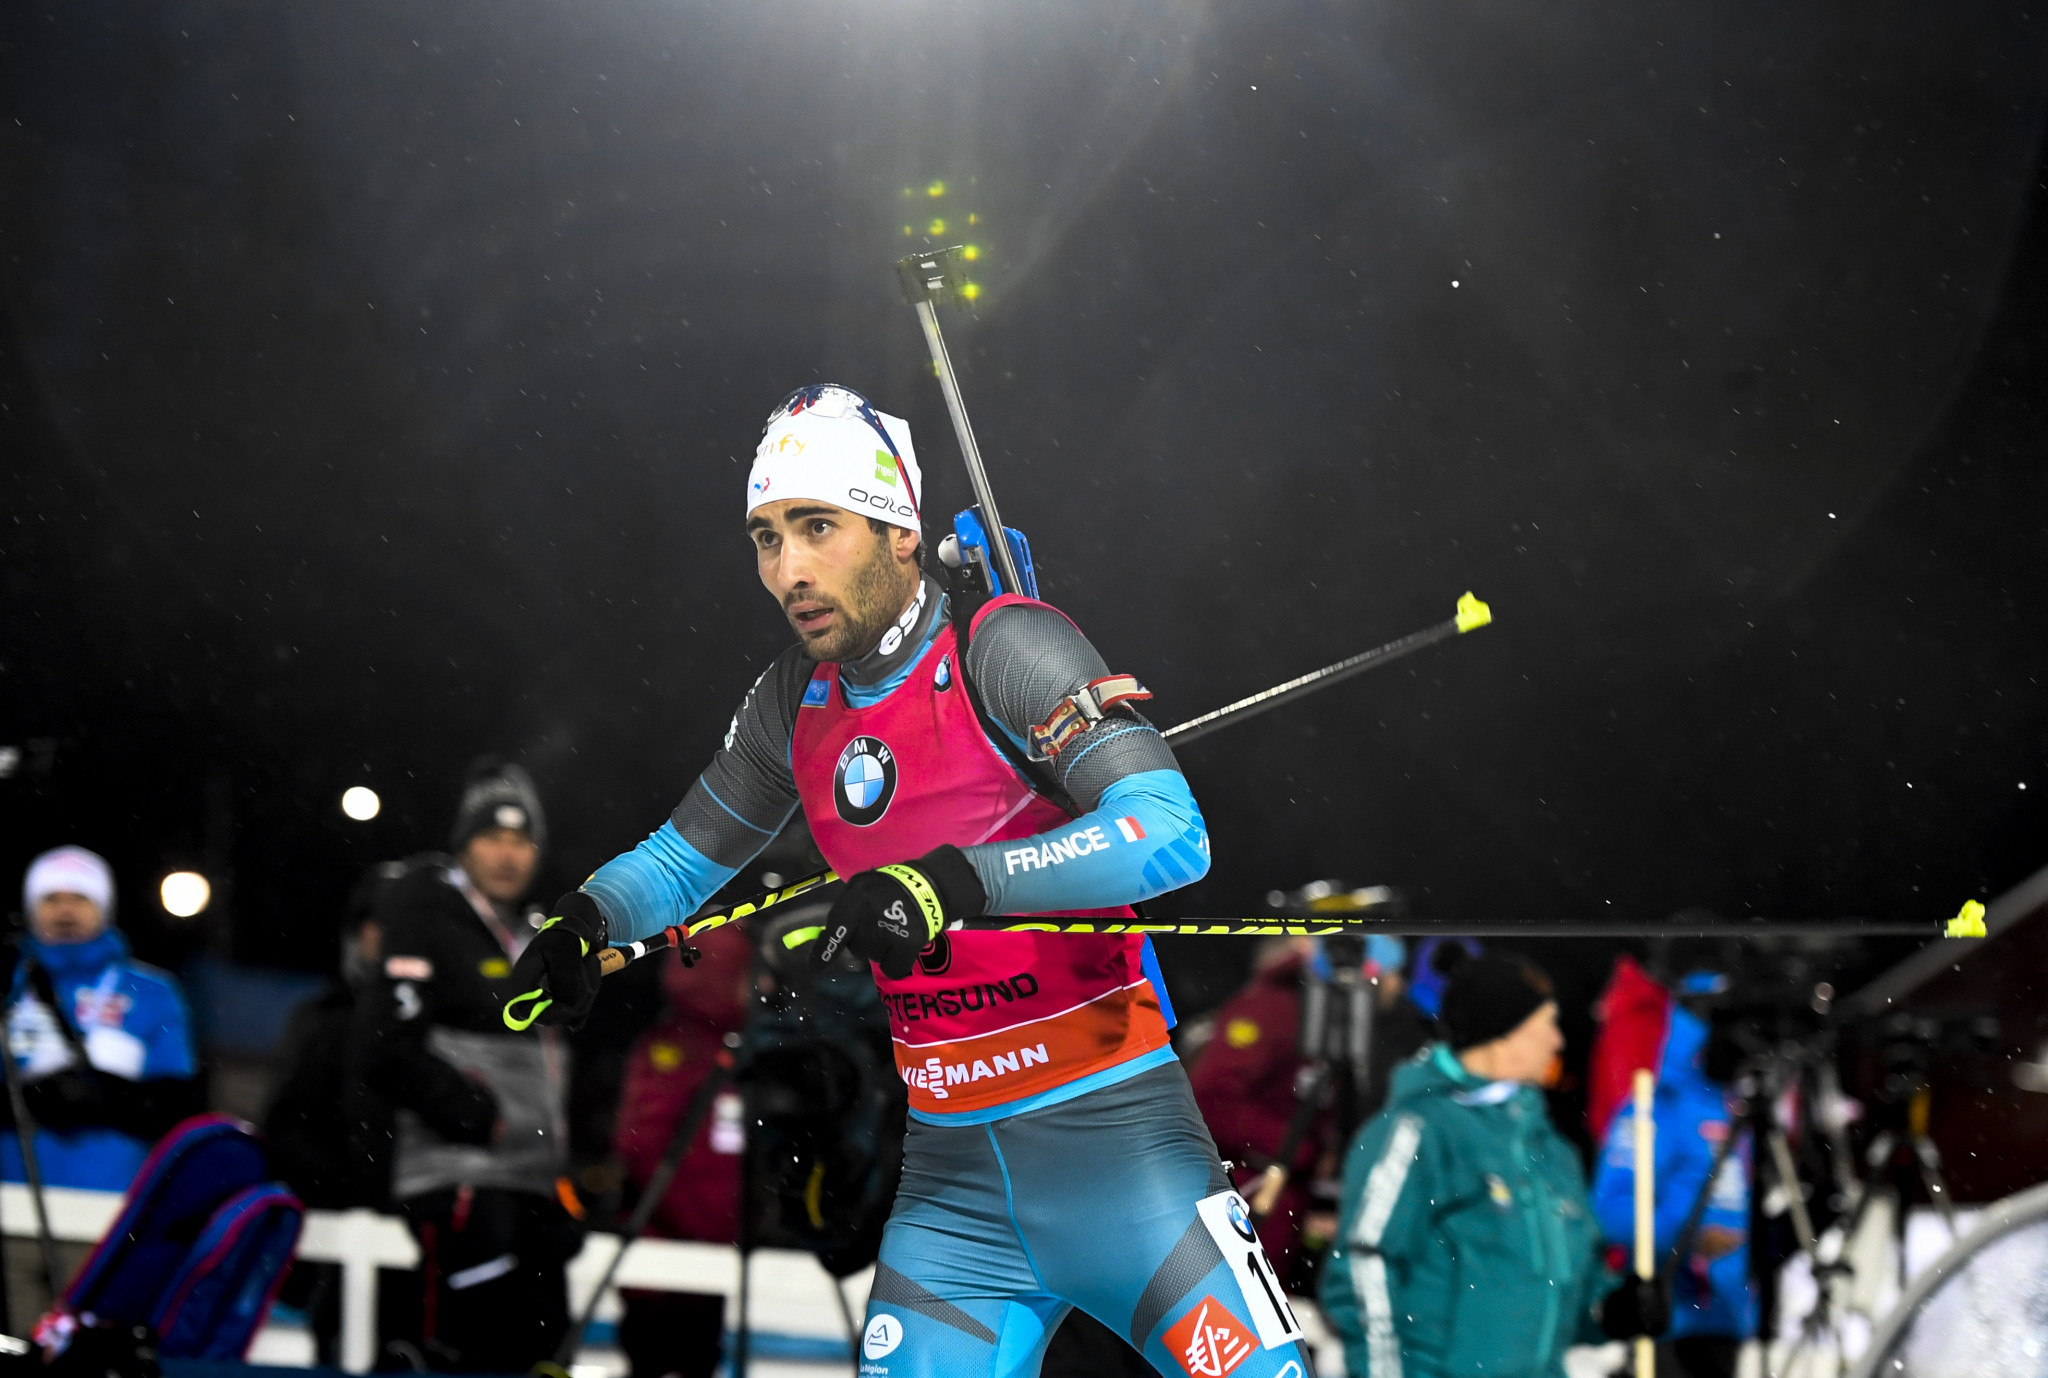 Frenchman Martin Fourcade fell narrowly short as he was 0.7 seconds behind the victorious Norwegian ©Getty Images